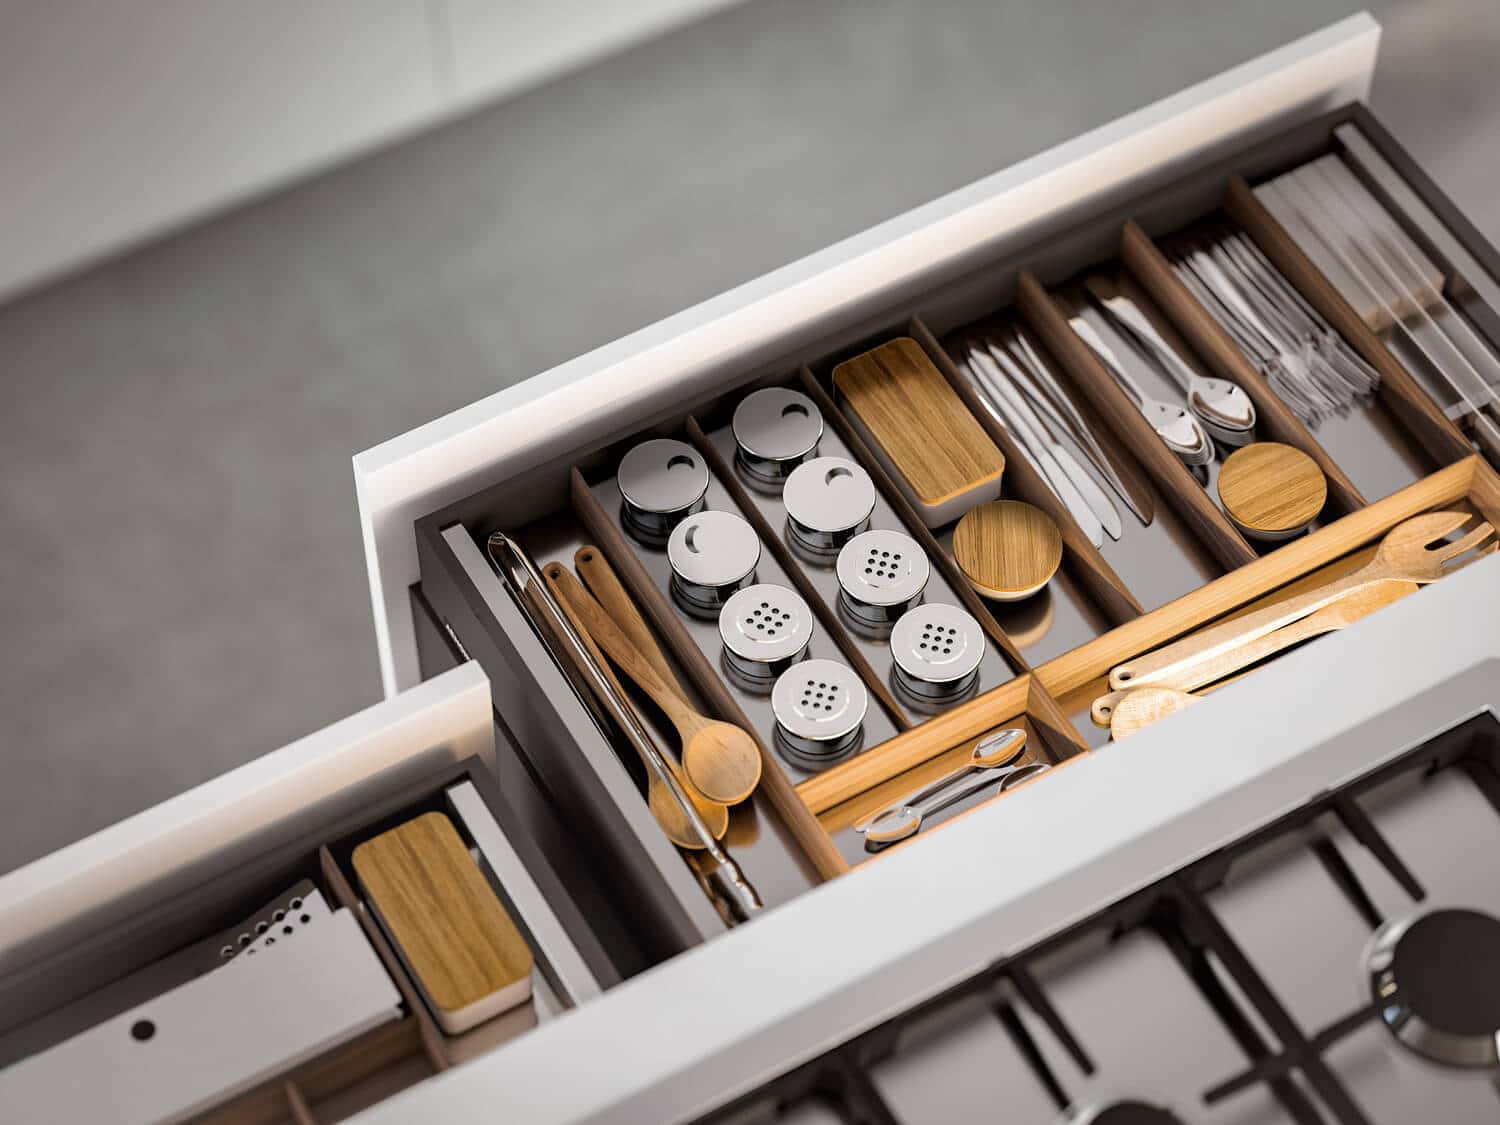 Accessorized drawer with inserts in Oak wood and stainless steel.